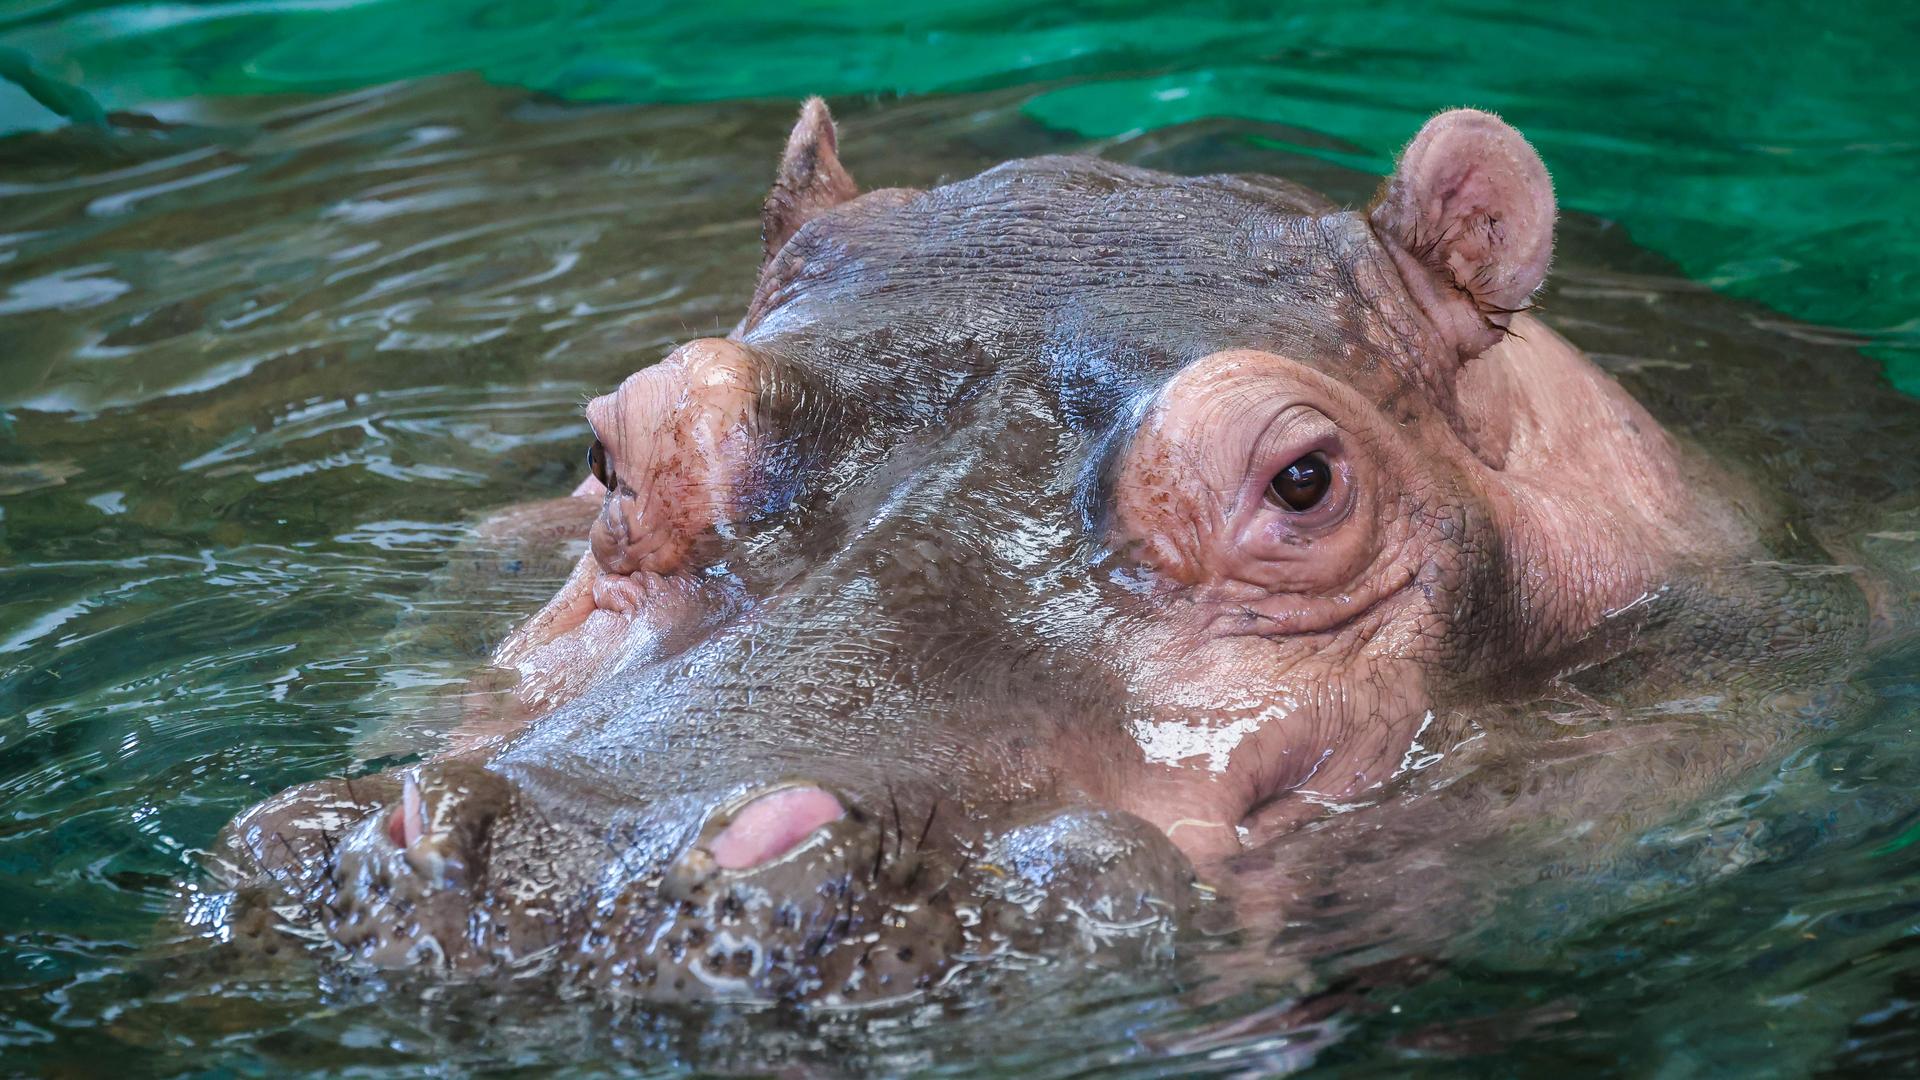 Hippo at the zoo